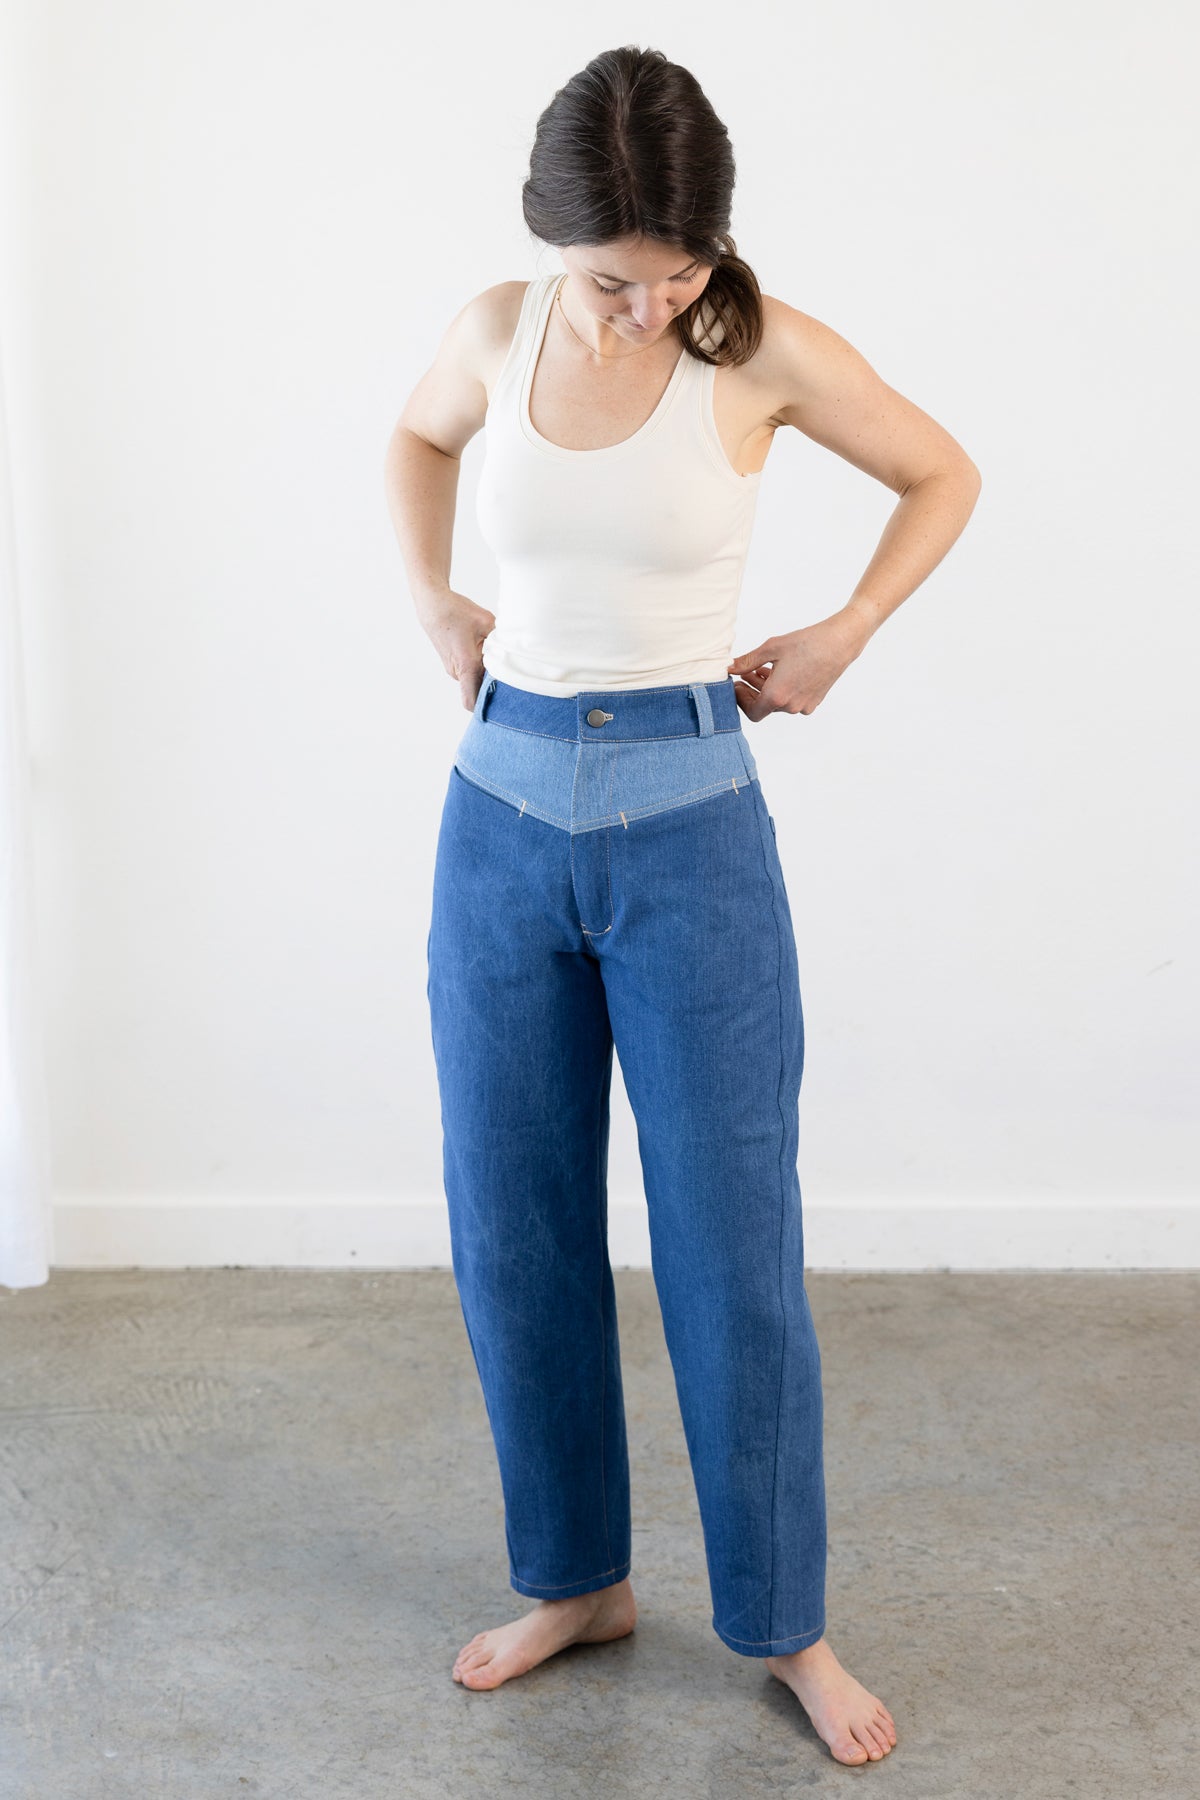 Buttress Jeans – Allie Olson Sewing Patterns